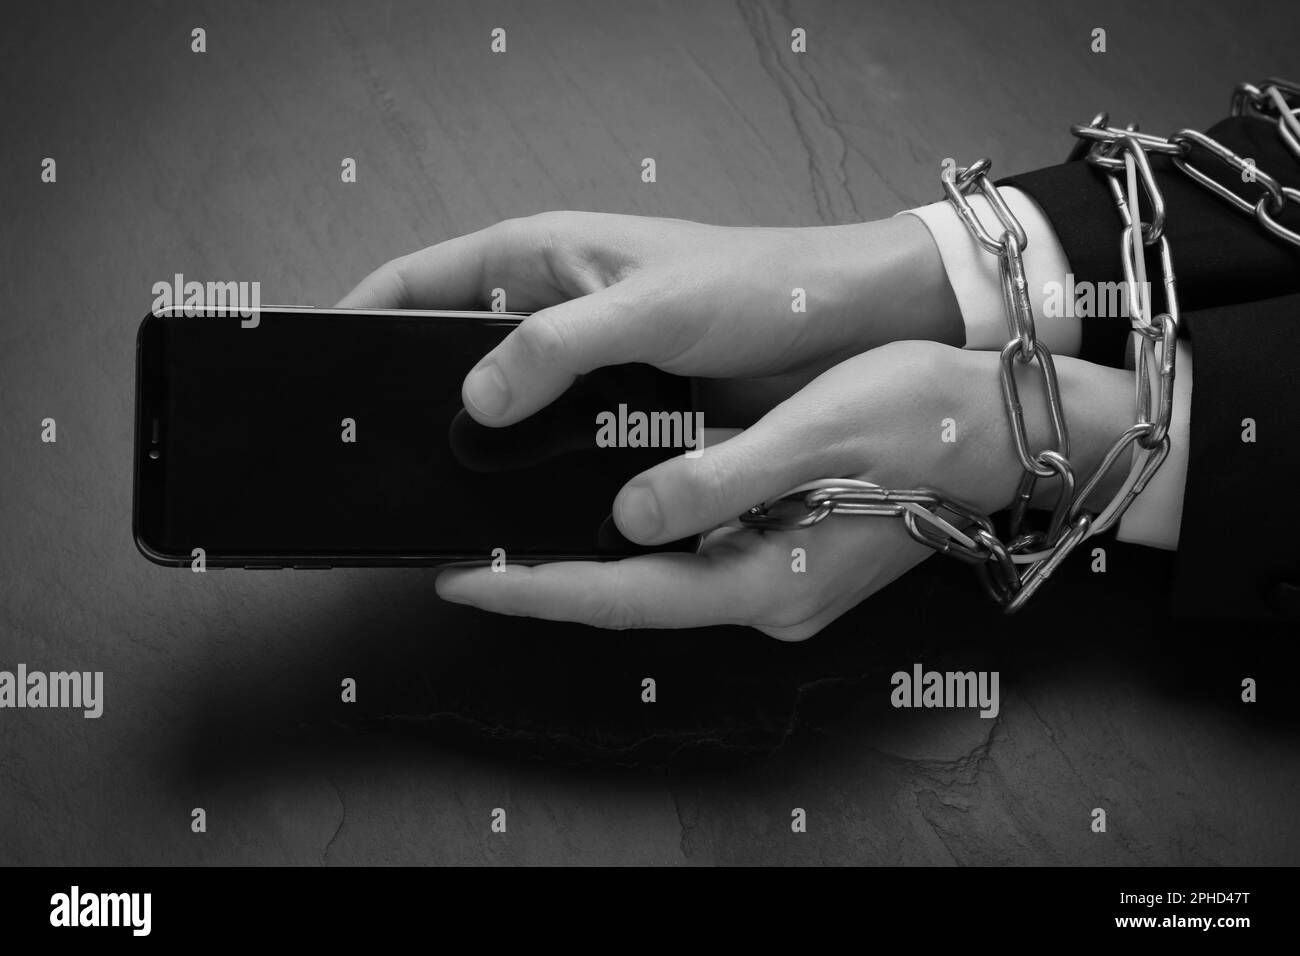 Closeup view of internet addicted woman with chained hands using smartphone at dark table, space for text. Black and white effect Stock Photo